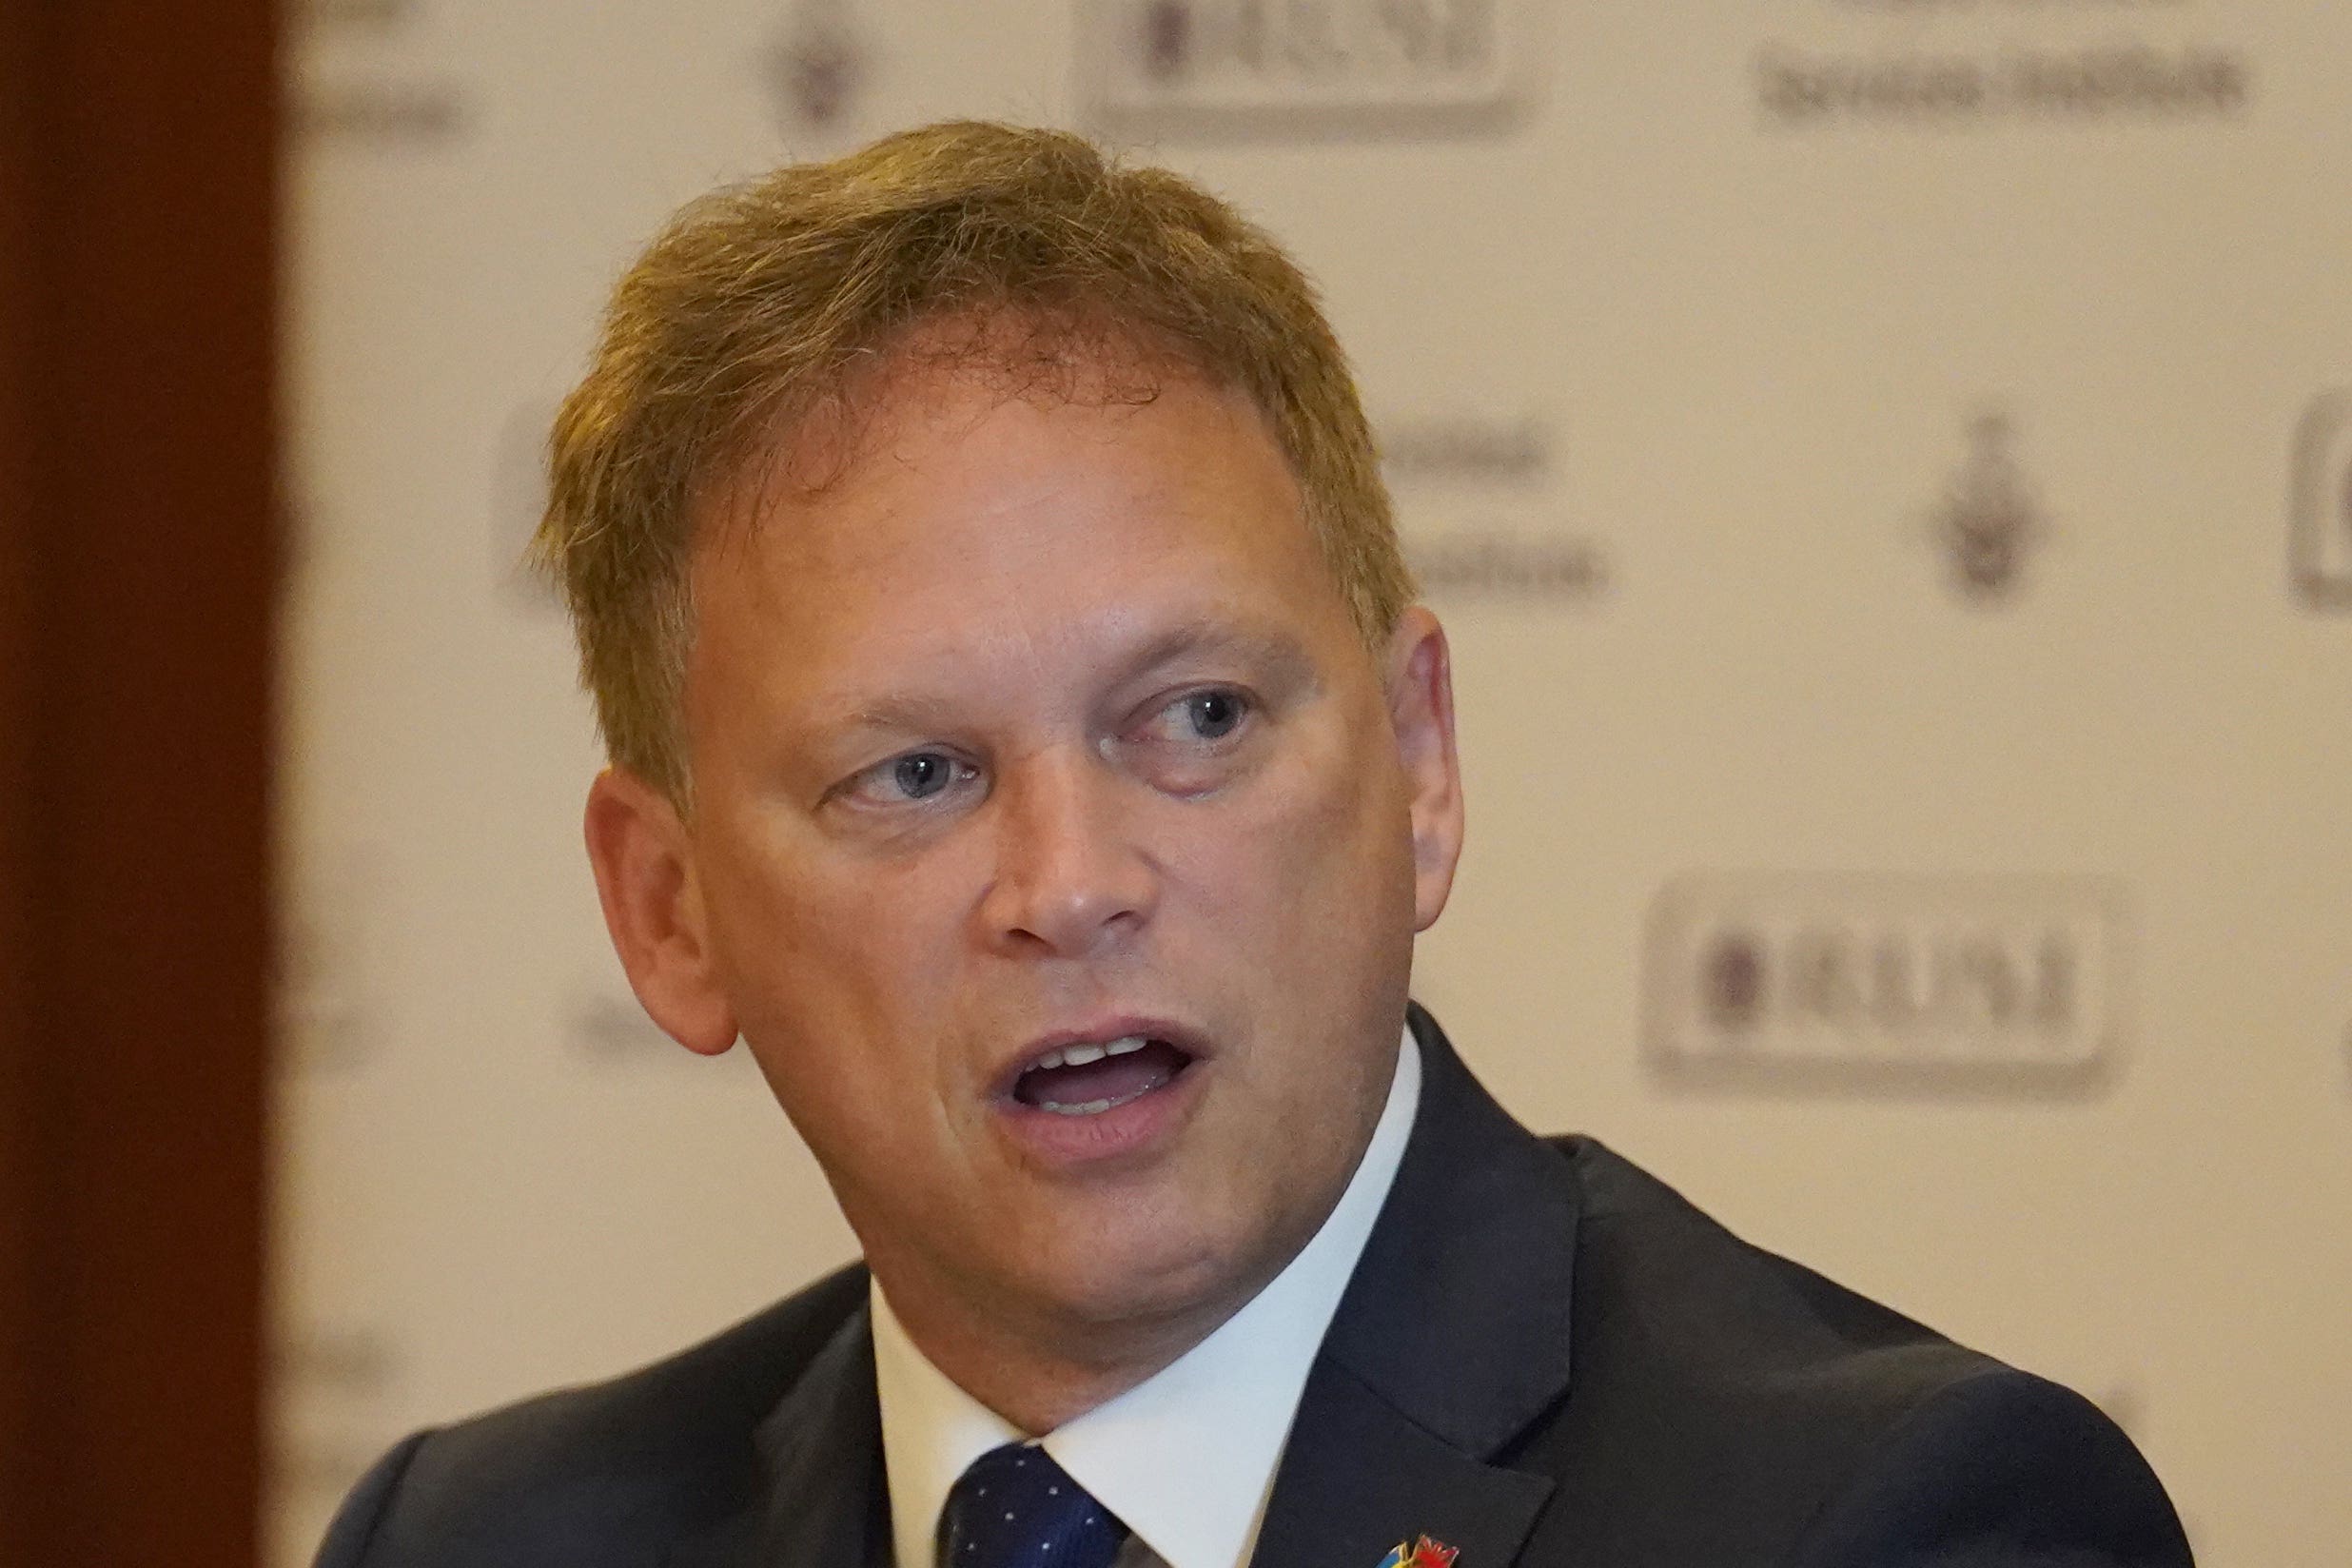 Grant Shapps says he agrees with description of Hamas as ‘human animals’